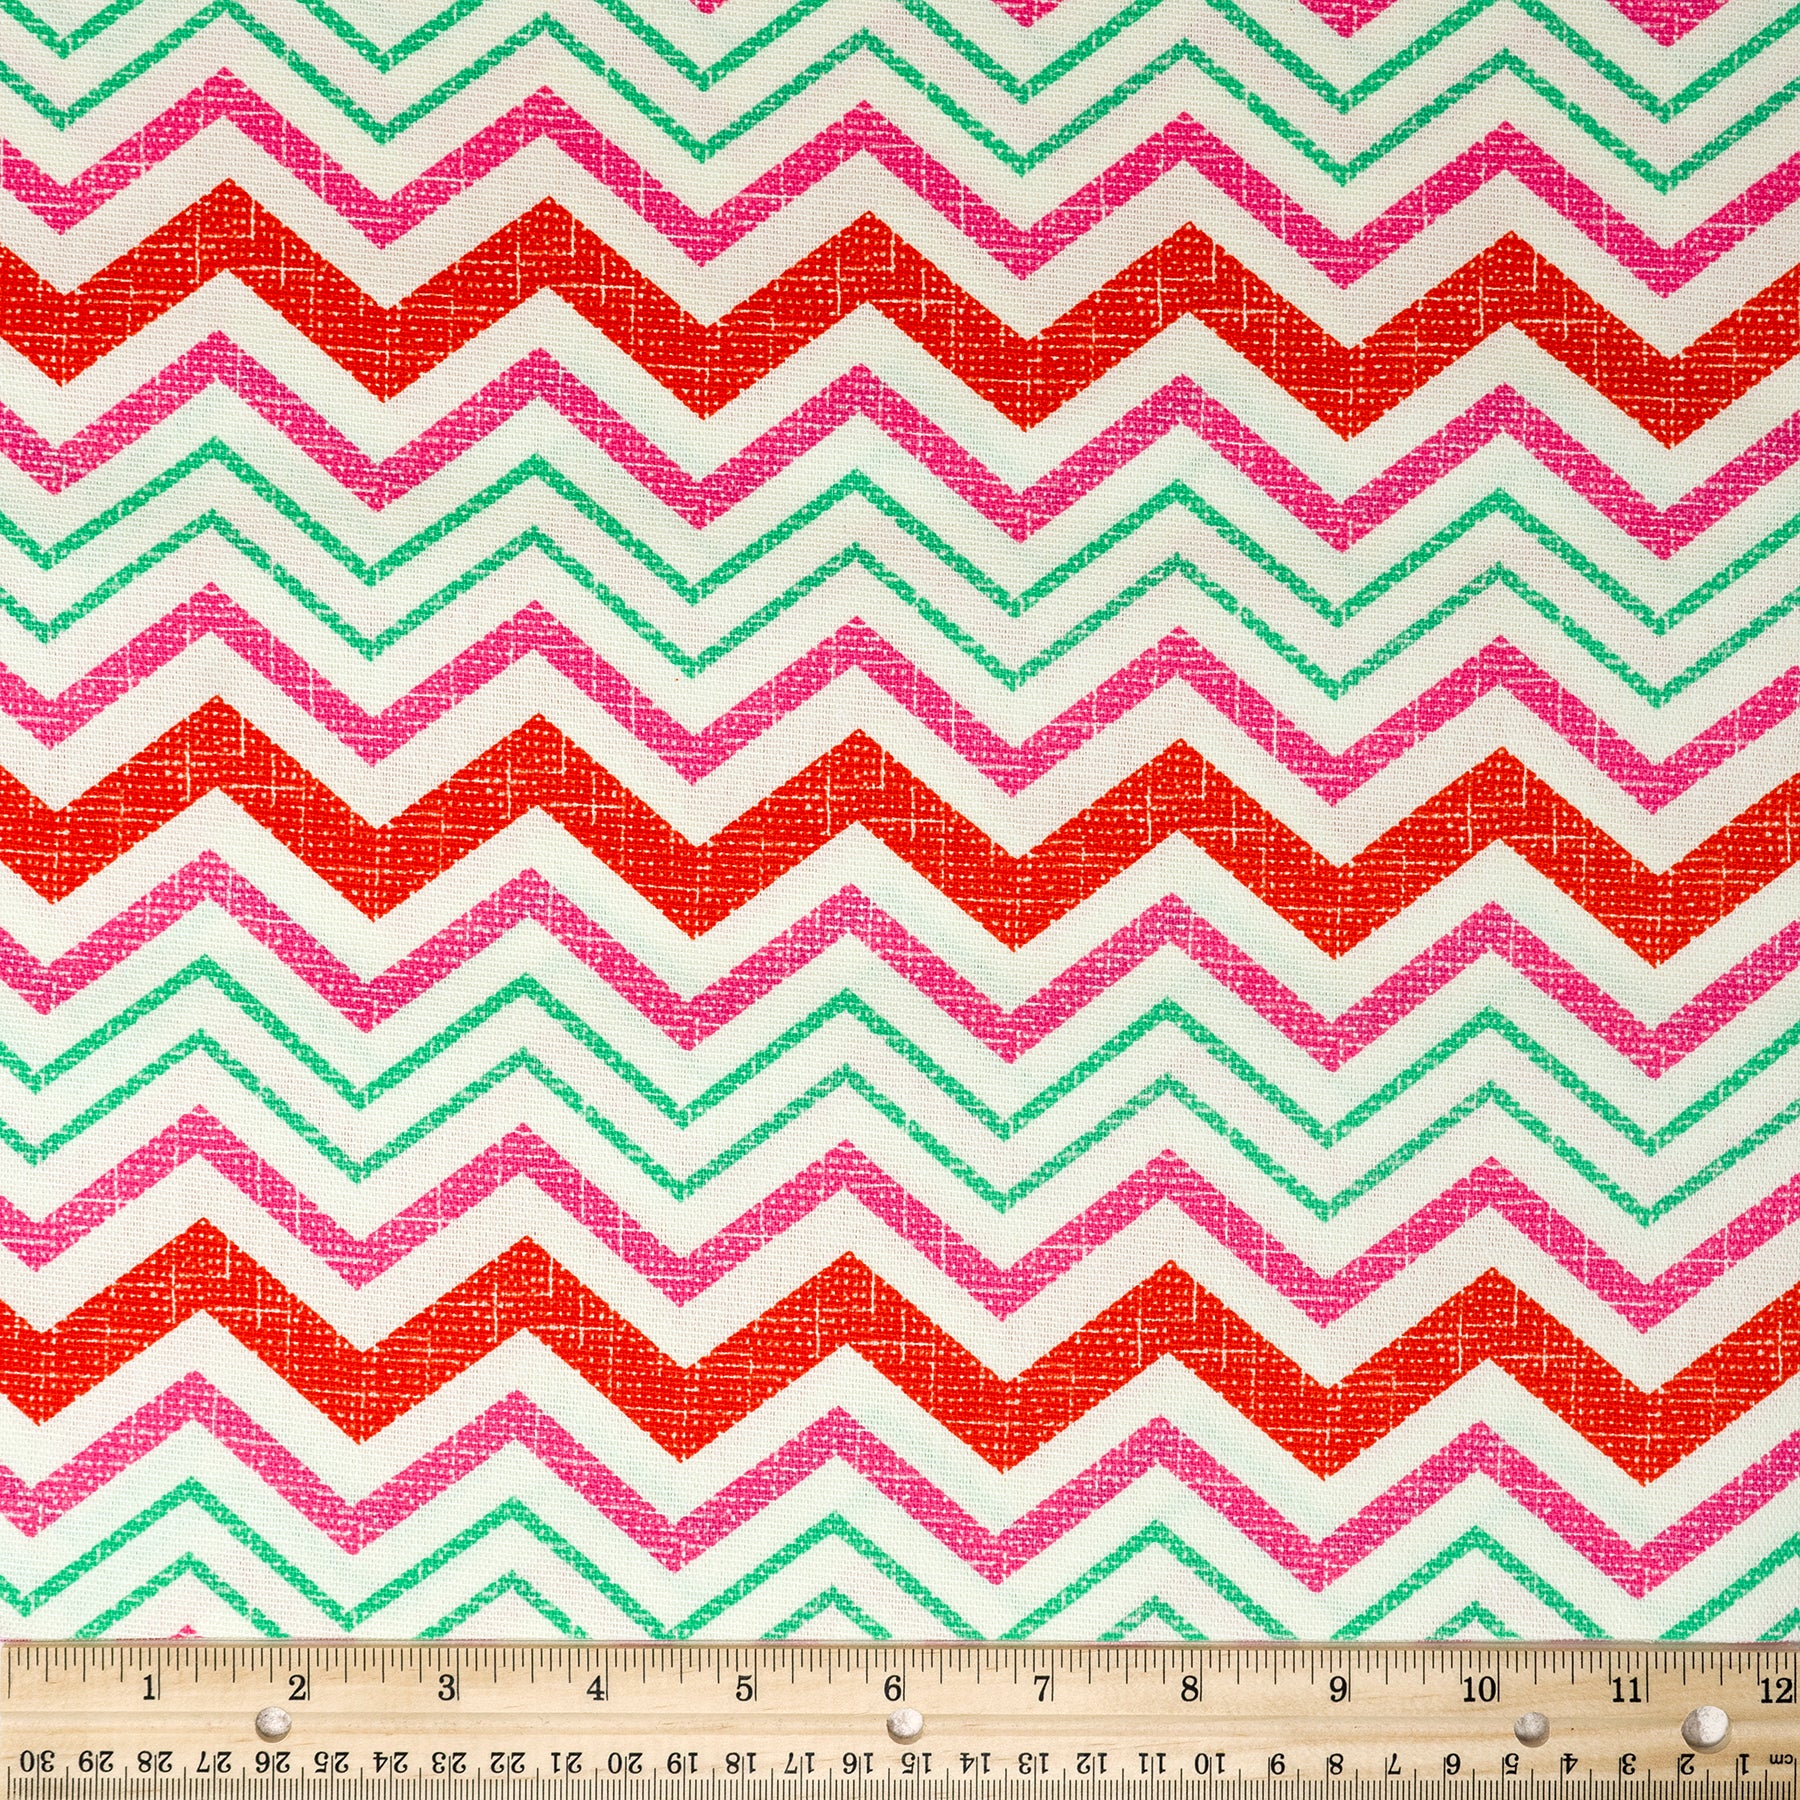 Waverly Inspirations 100% Cotton Duck 45" Width Chevron Print Hot Pink Color Sewing Fabric by the Yard